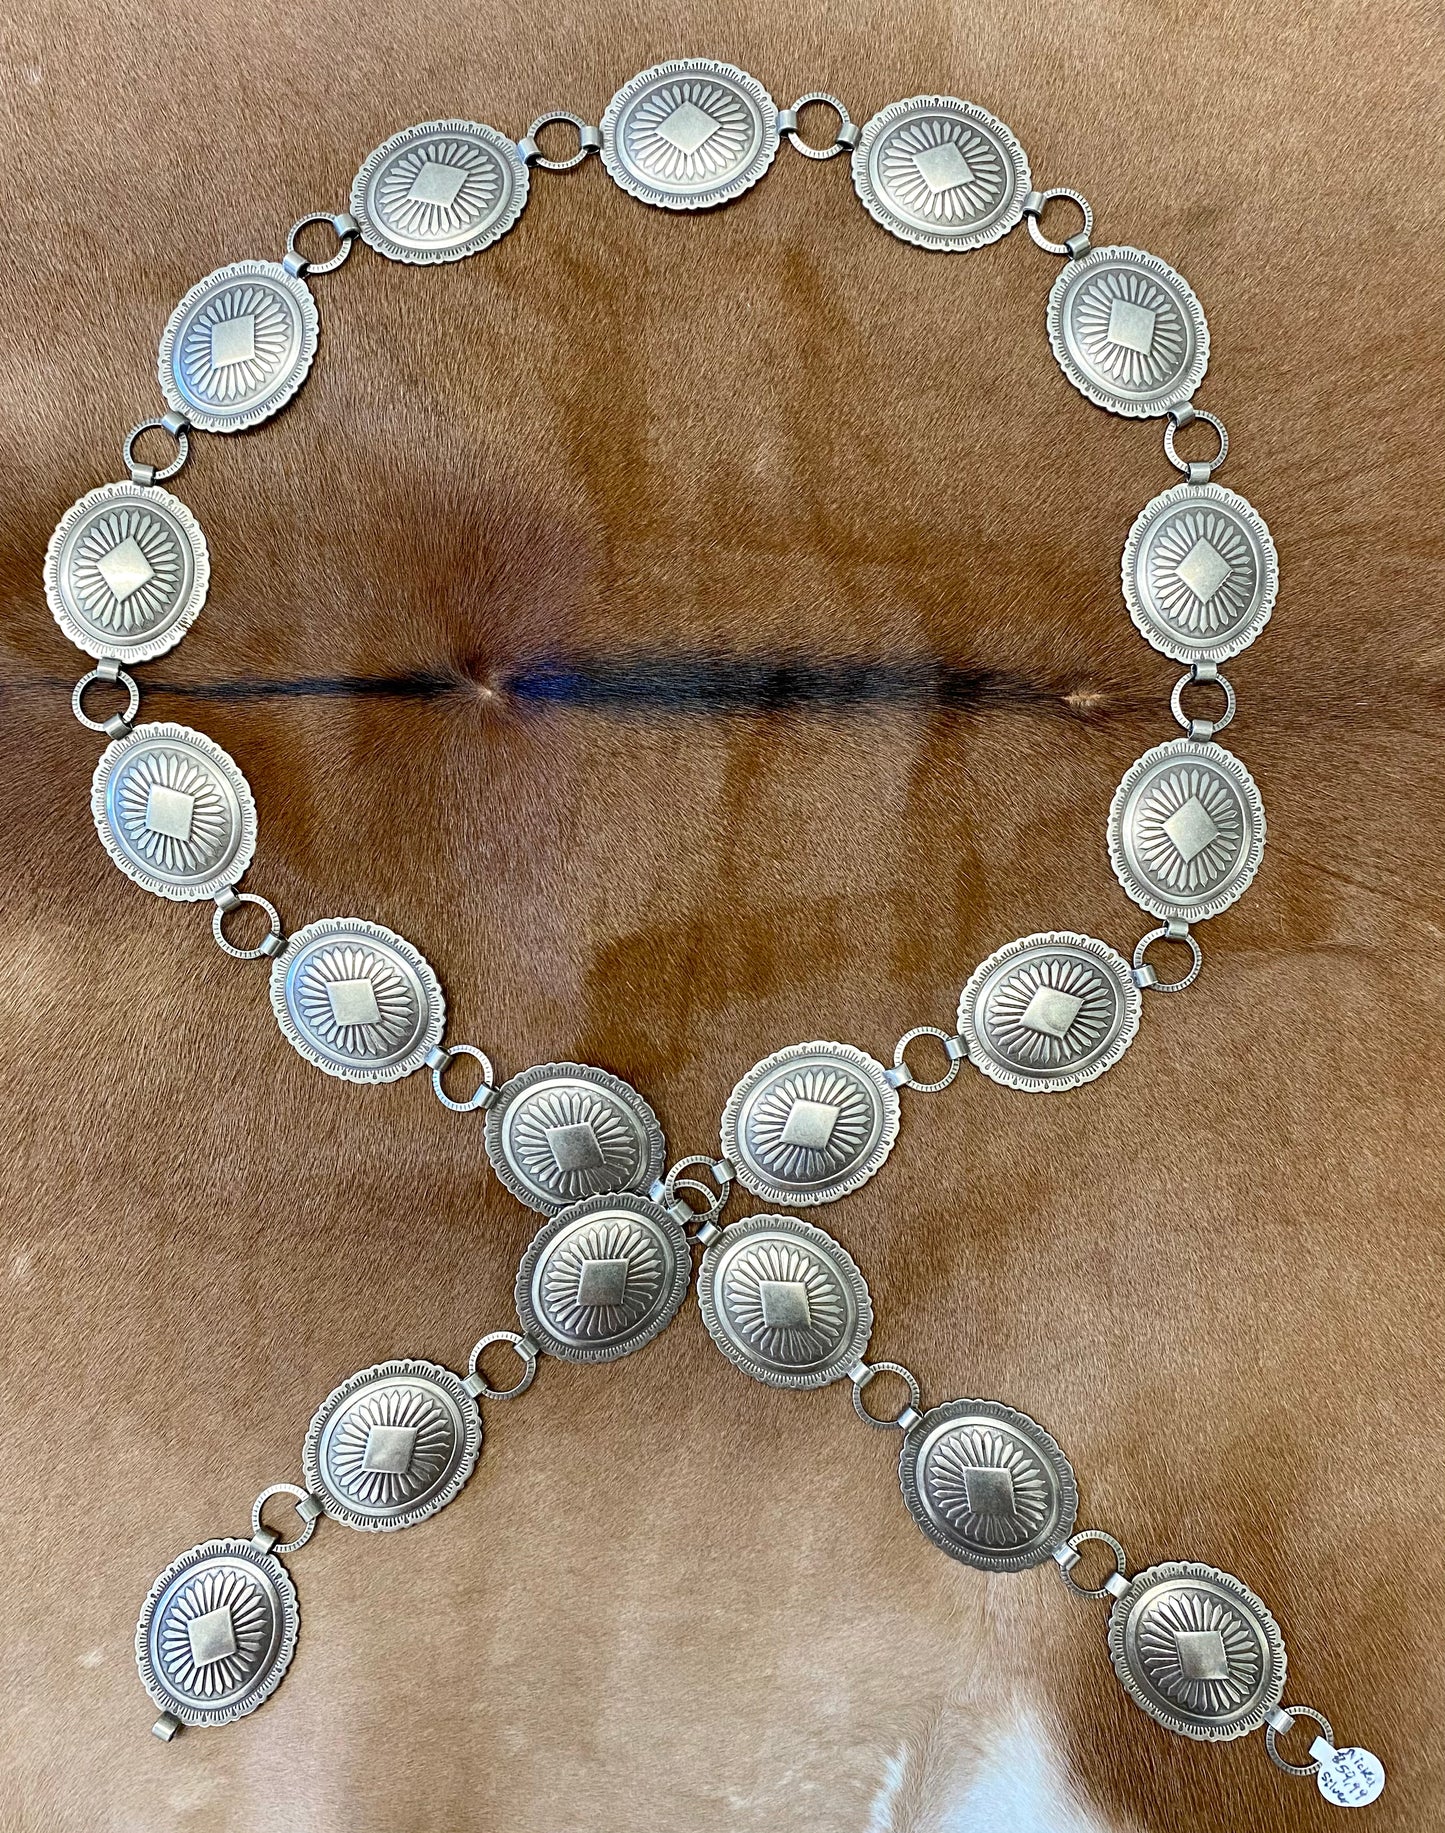 Beautiful 19 piece concho Nickle silver belt. This belt is adjustable as you can latch it on to any of the round pieces in-between the concho pieces. Each concho piece has a design etched on to it. This belt is amazing and will go so well with any outfit. Everyone needs a concho belt in their accessory wardrobe.   Size: 43” inches   1.25” x 1.5” inches Concho pieces 